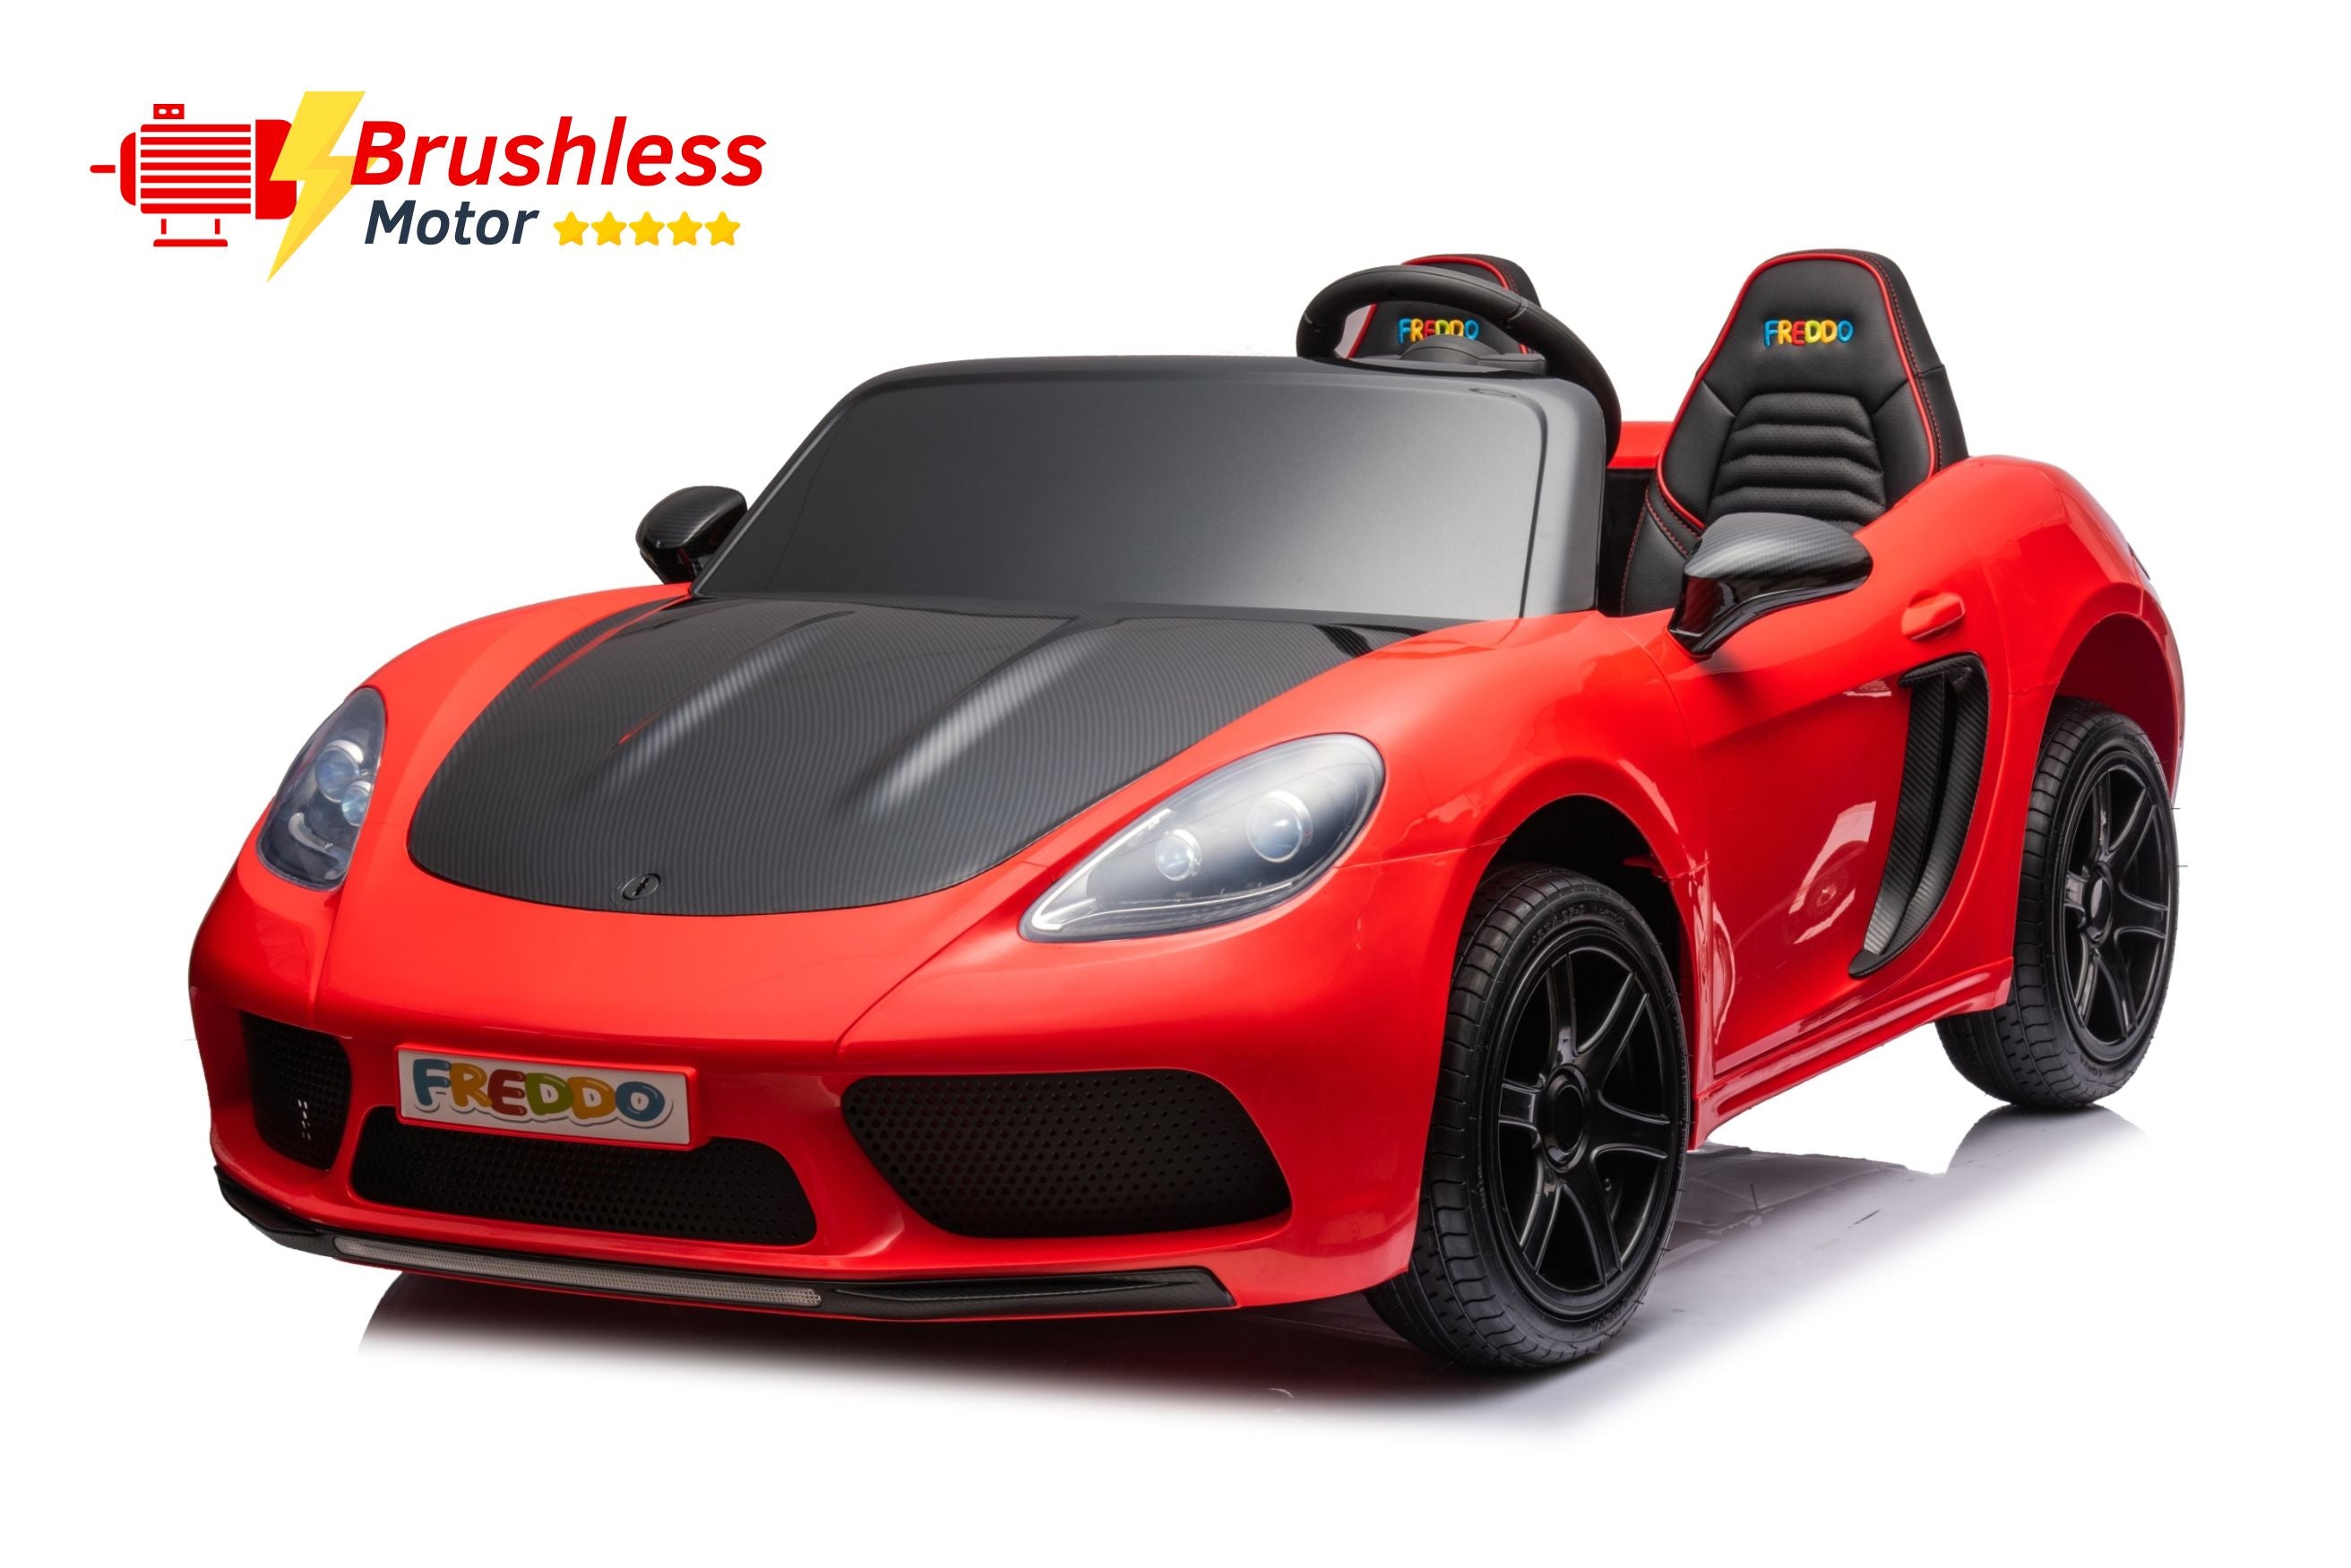 48V Freddo Rocket: World's Fastest 2-Seater Kids' Ride-On with Advanced Brushless Motor & Precision Differential